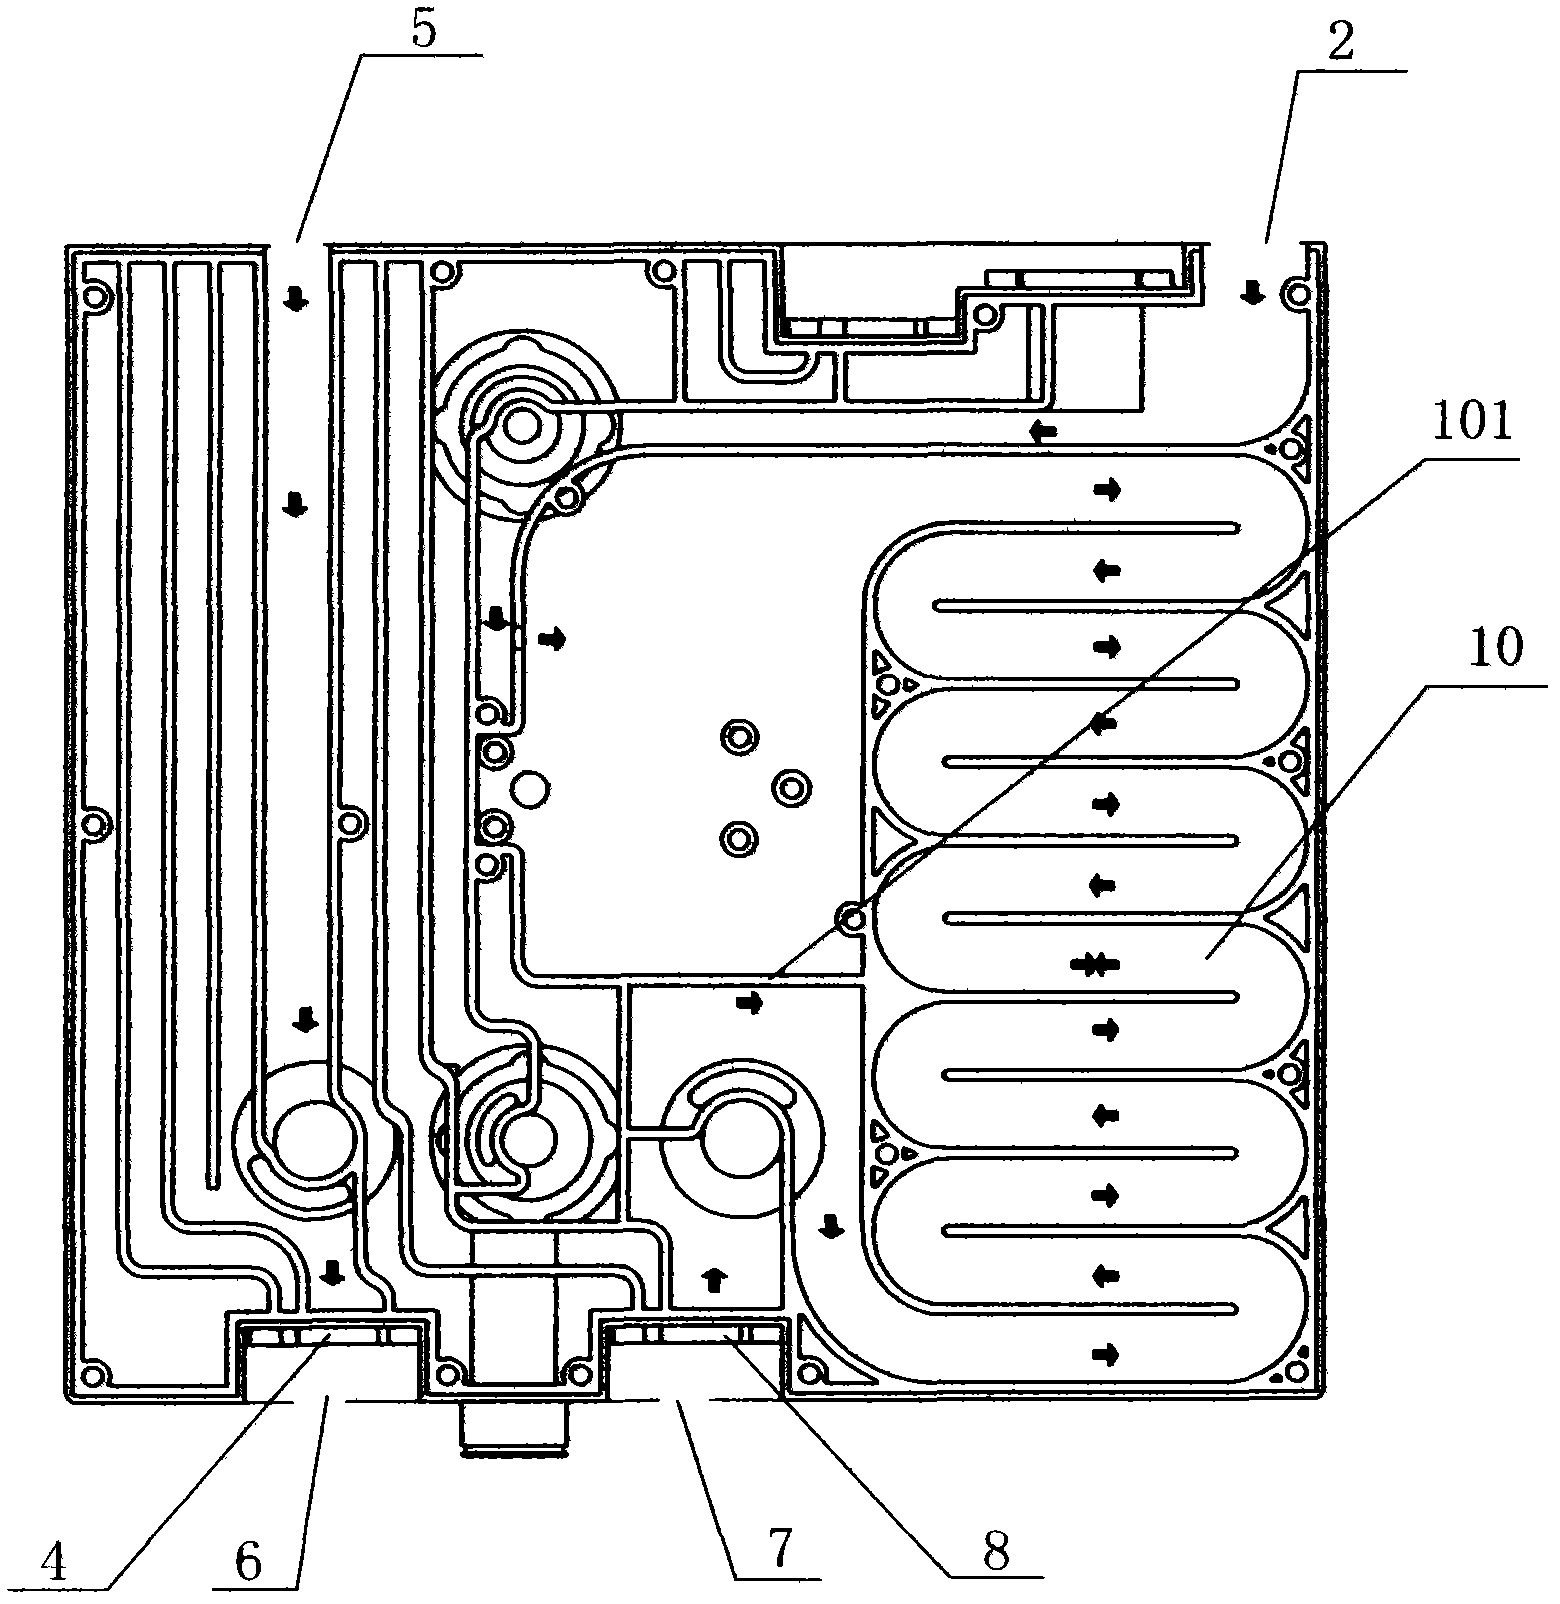 Gas circuit structure for anesthesia respirator